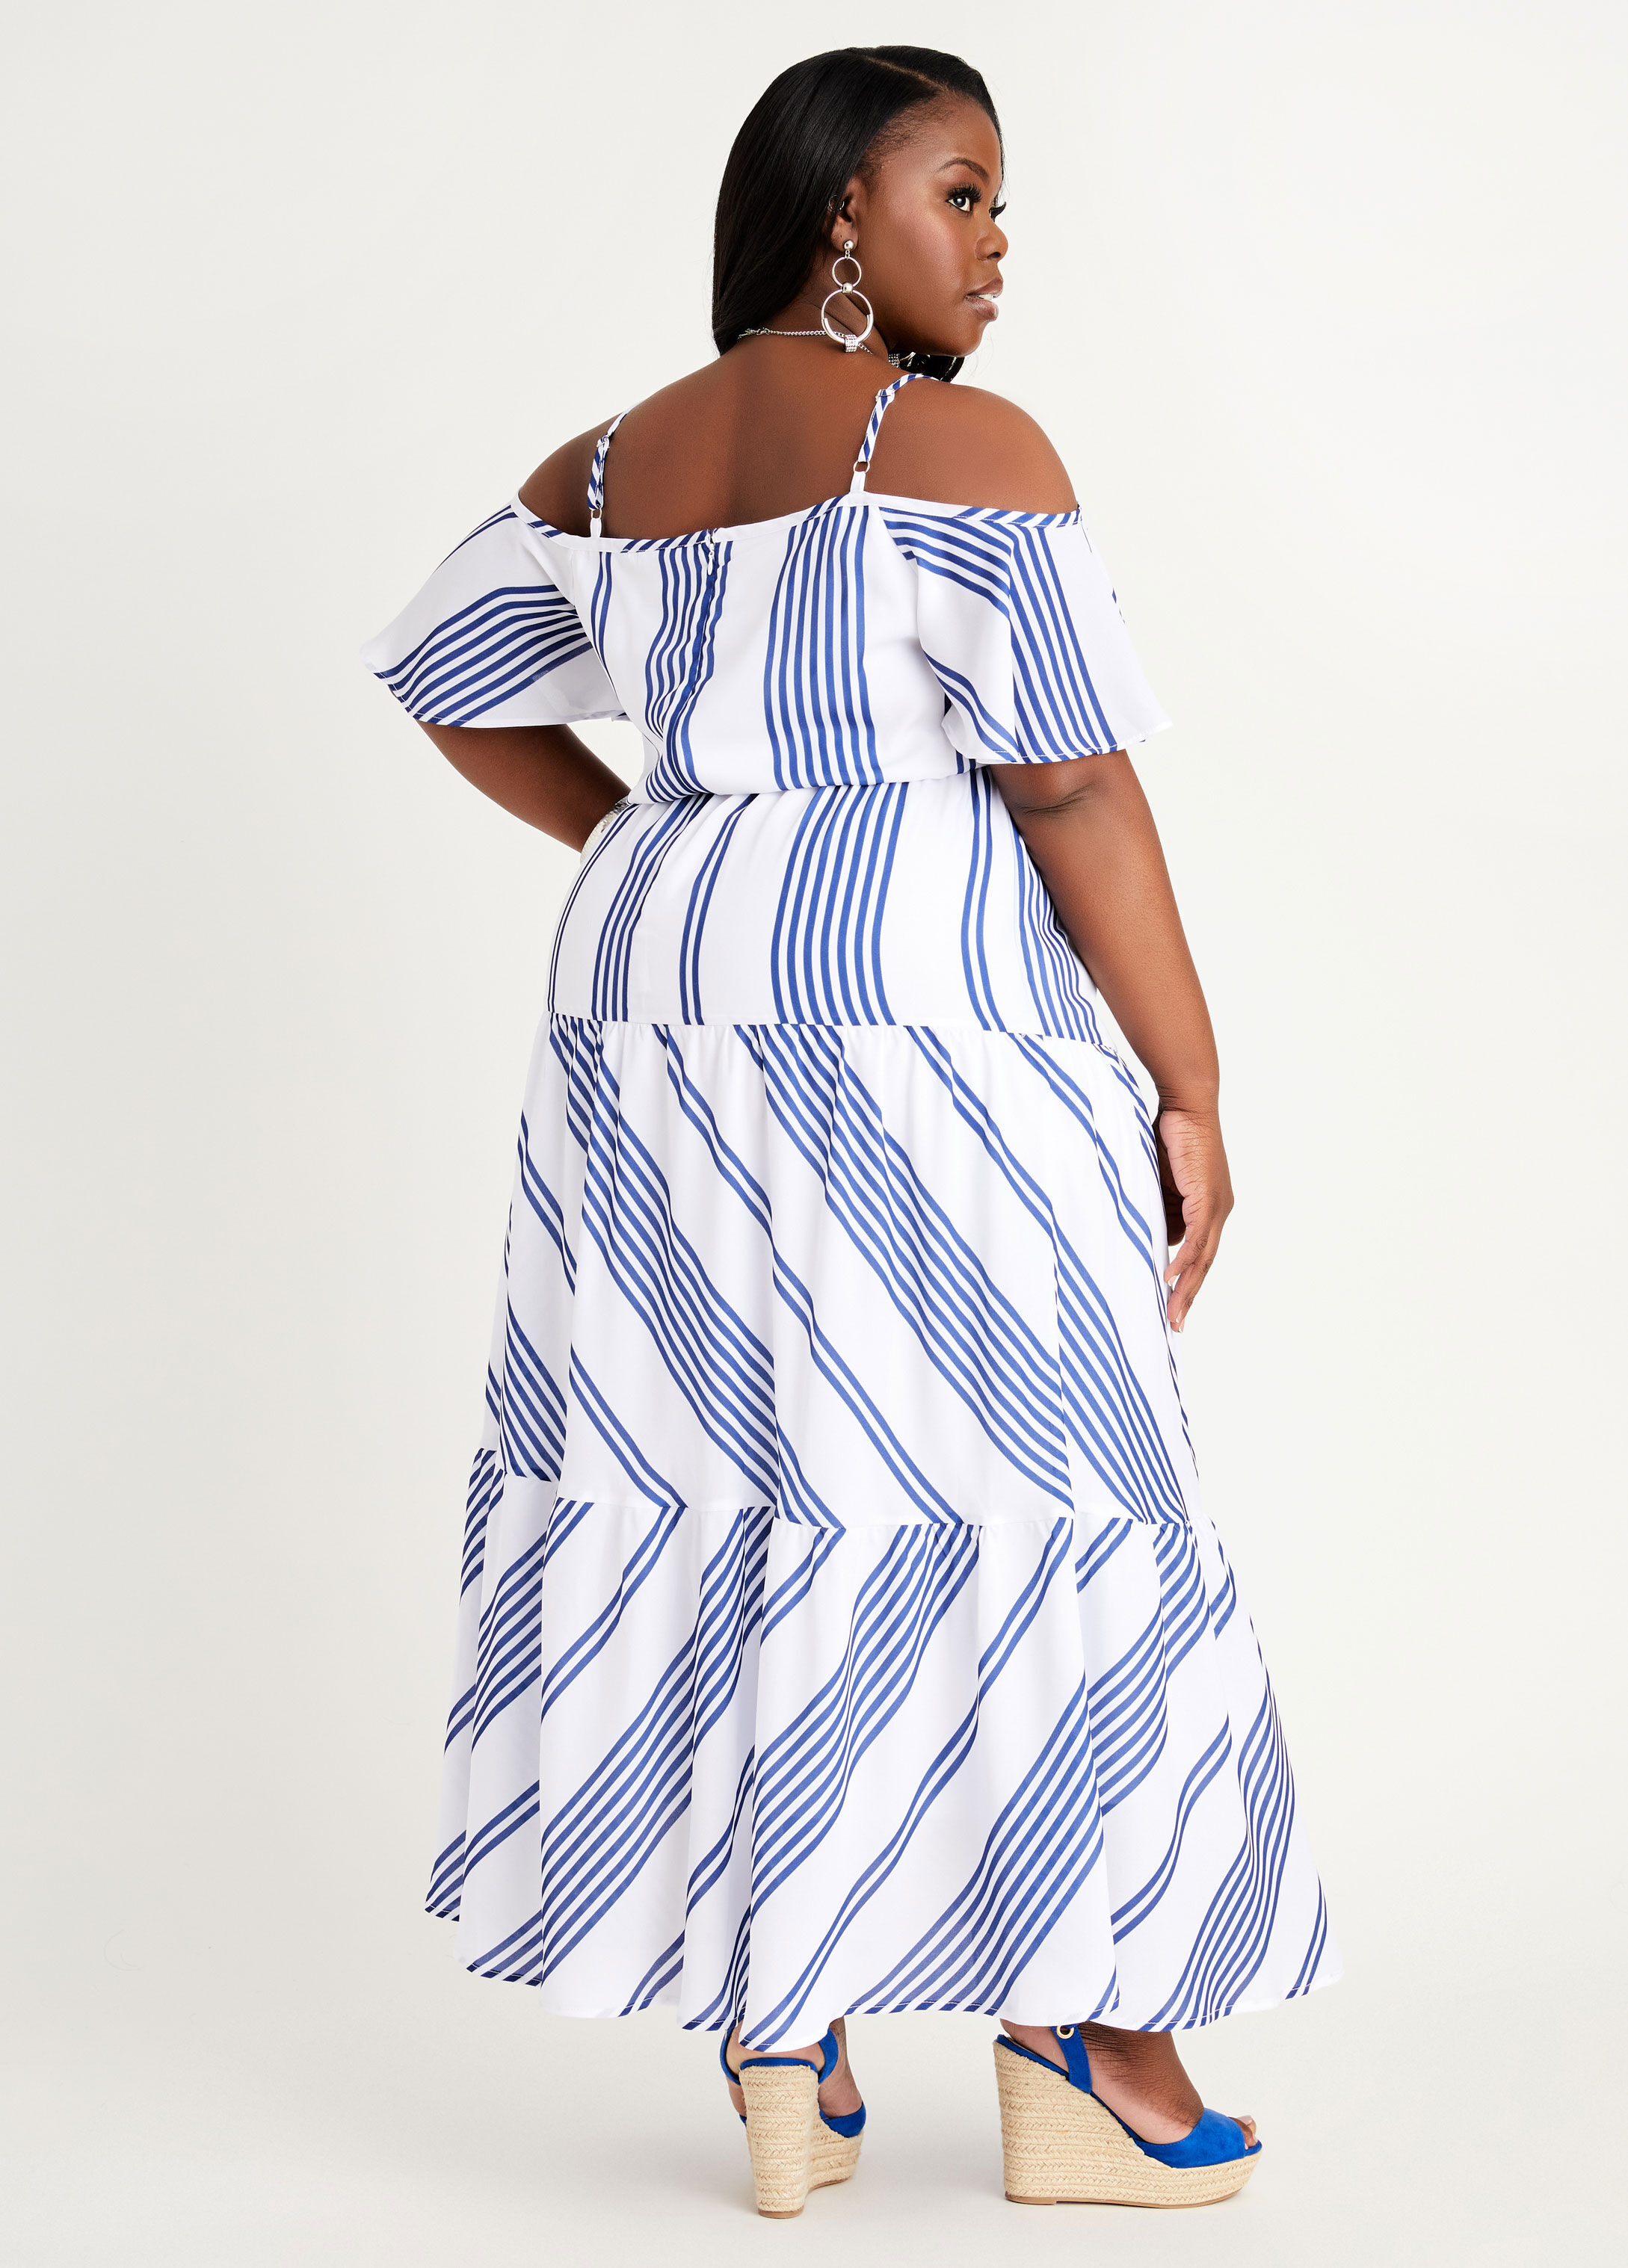 Plus Size Tall Collection | Ashley Stewart